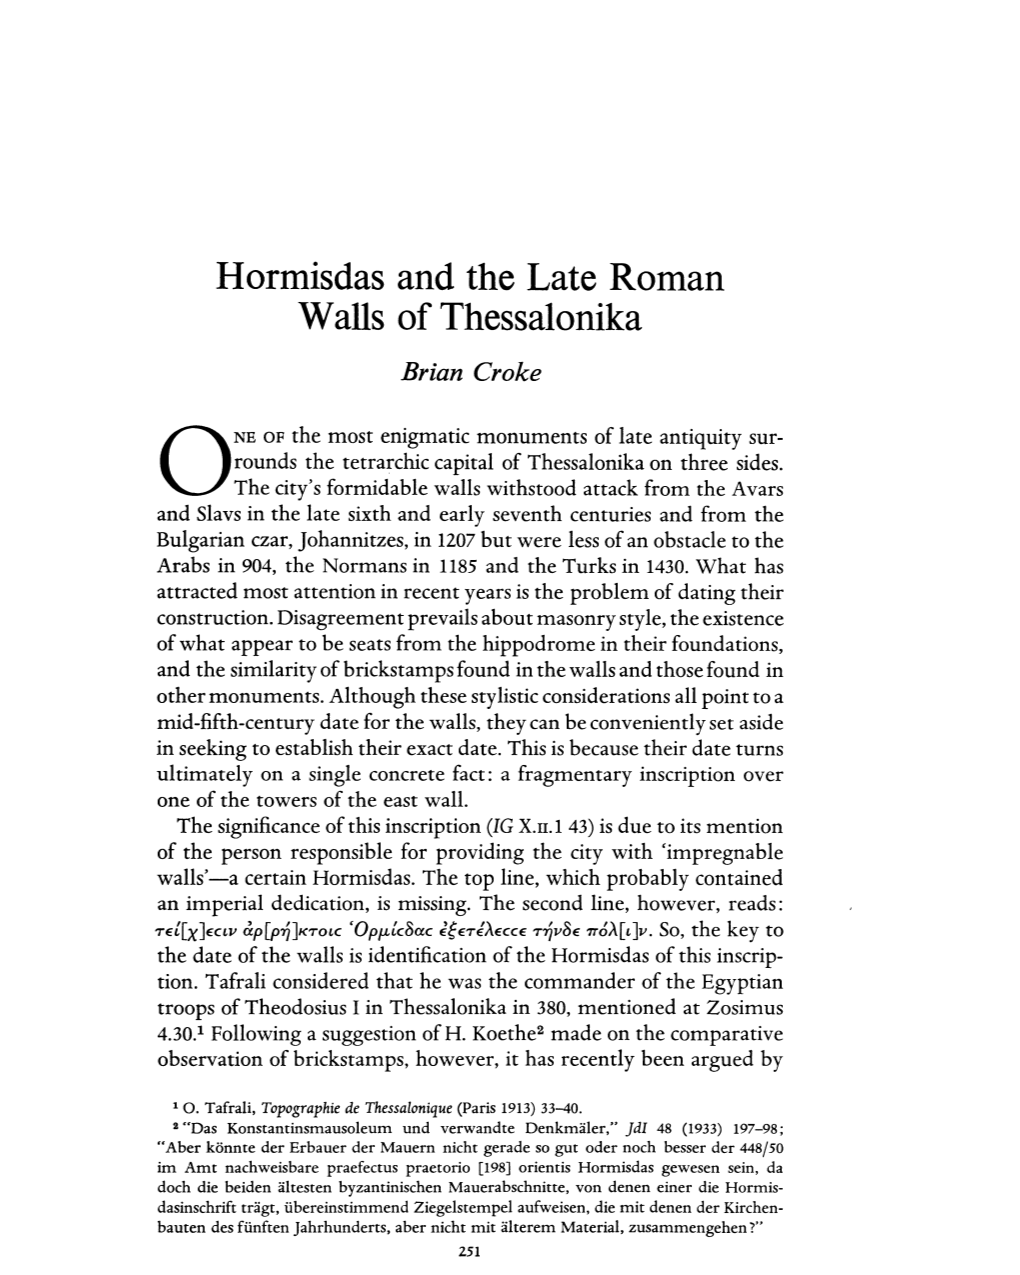 Hormisdas and the Late Roman Walls of Thessalonika Croke, Brian Greek, Roman and Byzantine Studies; Jan 1, 1978; 19, 3; Periodicals Archive Online Pg